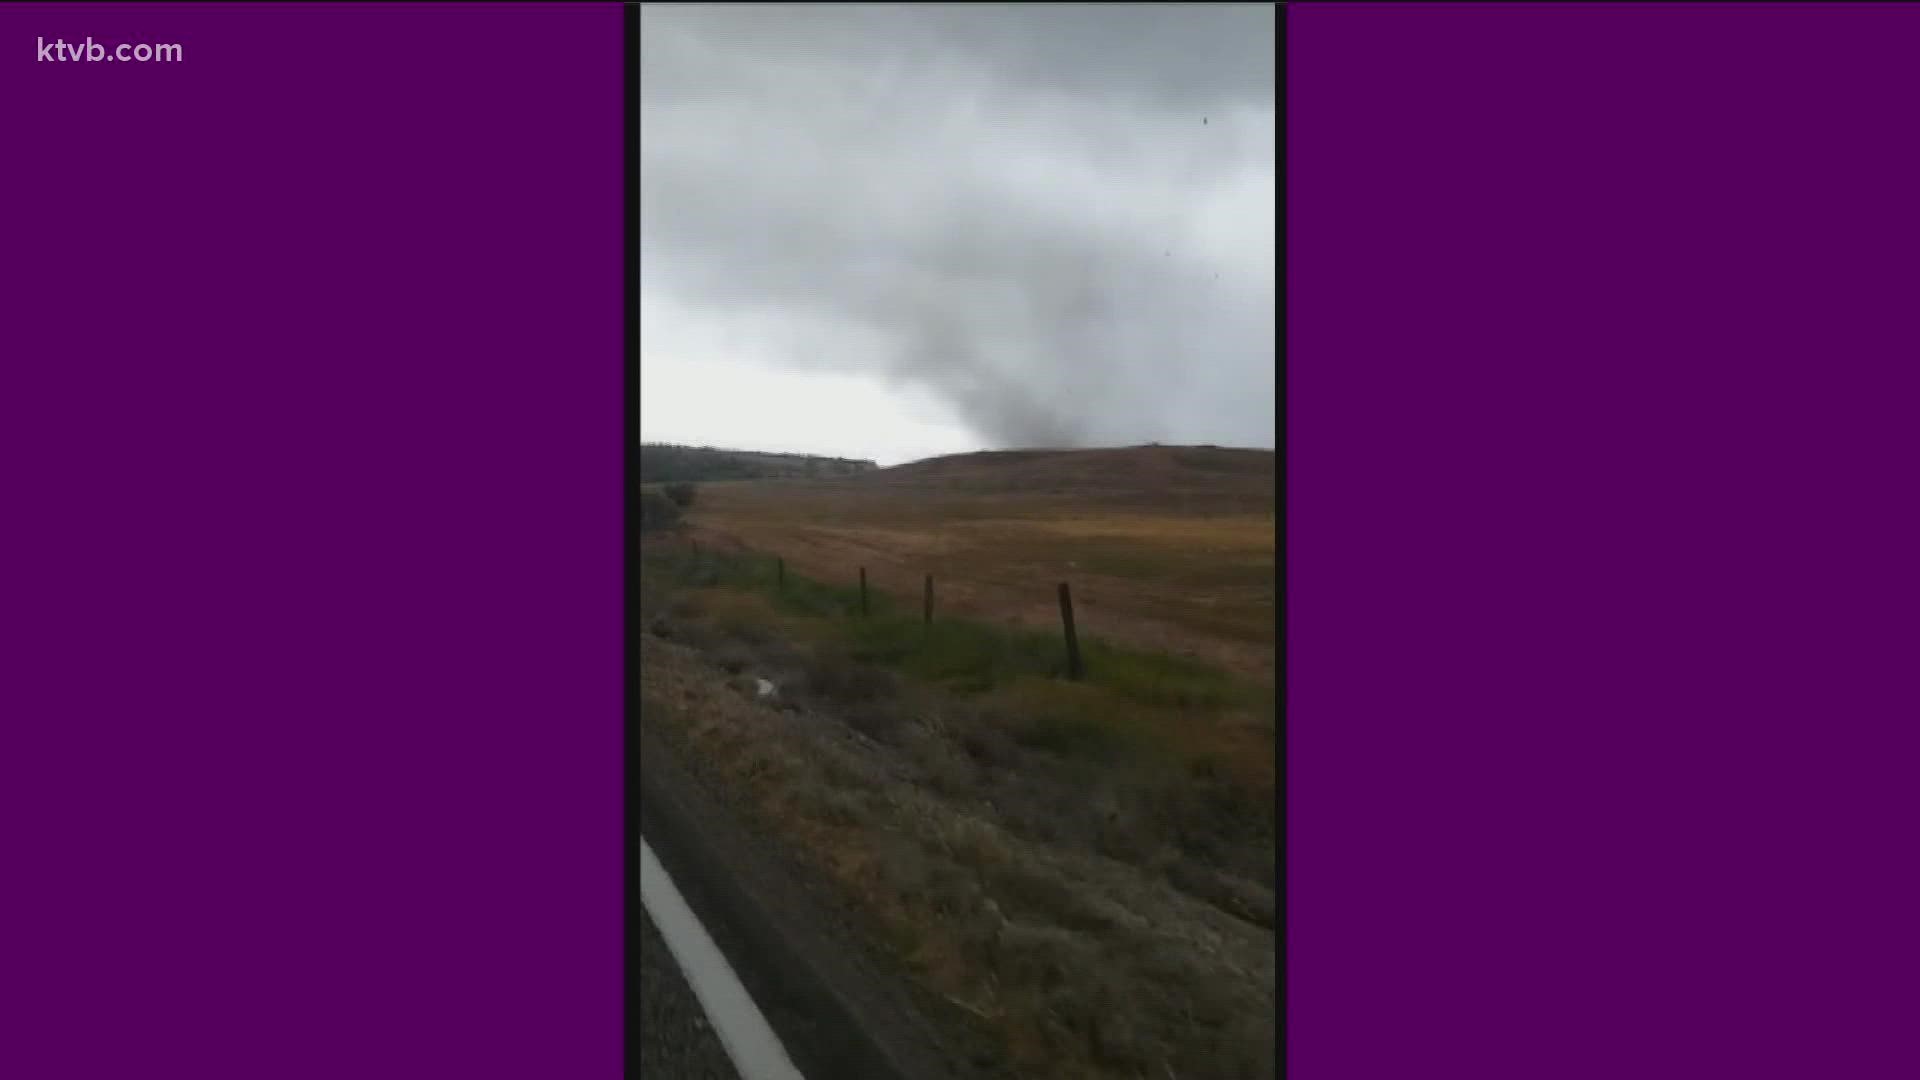 An employee with the National Weather Service spotted the tornado approaching Idaho State Highway 78 on Friday, about a mile northwest of Givens Hot Springs.